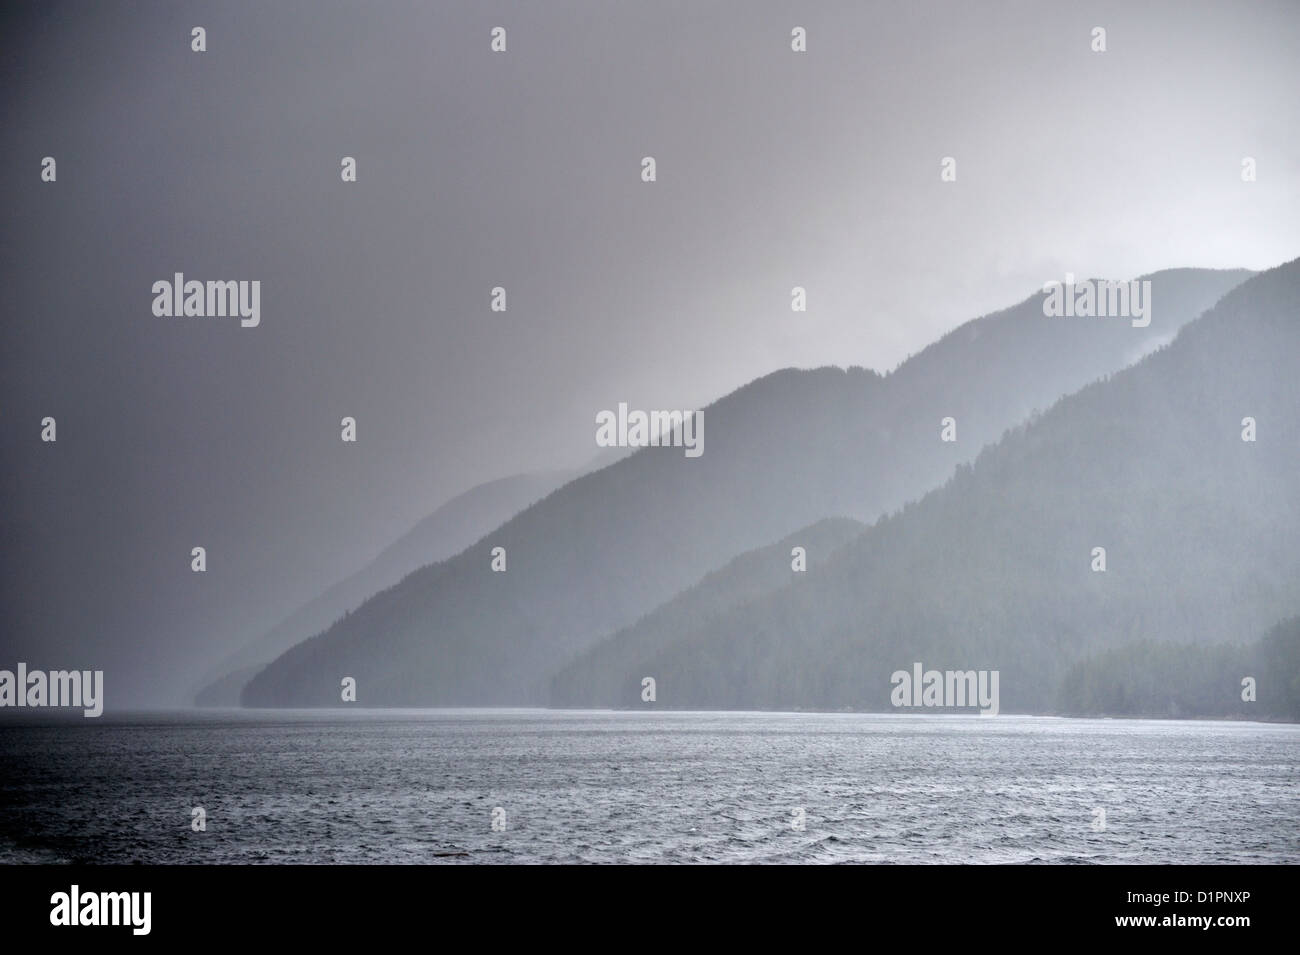 View on the Inside Passage ferry journey near Vancouver Island, British Columbia, Canada Stock Photo